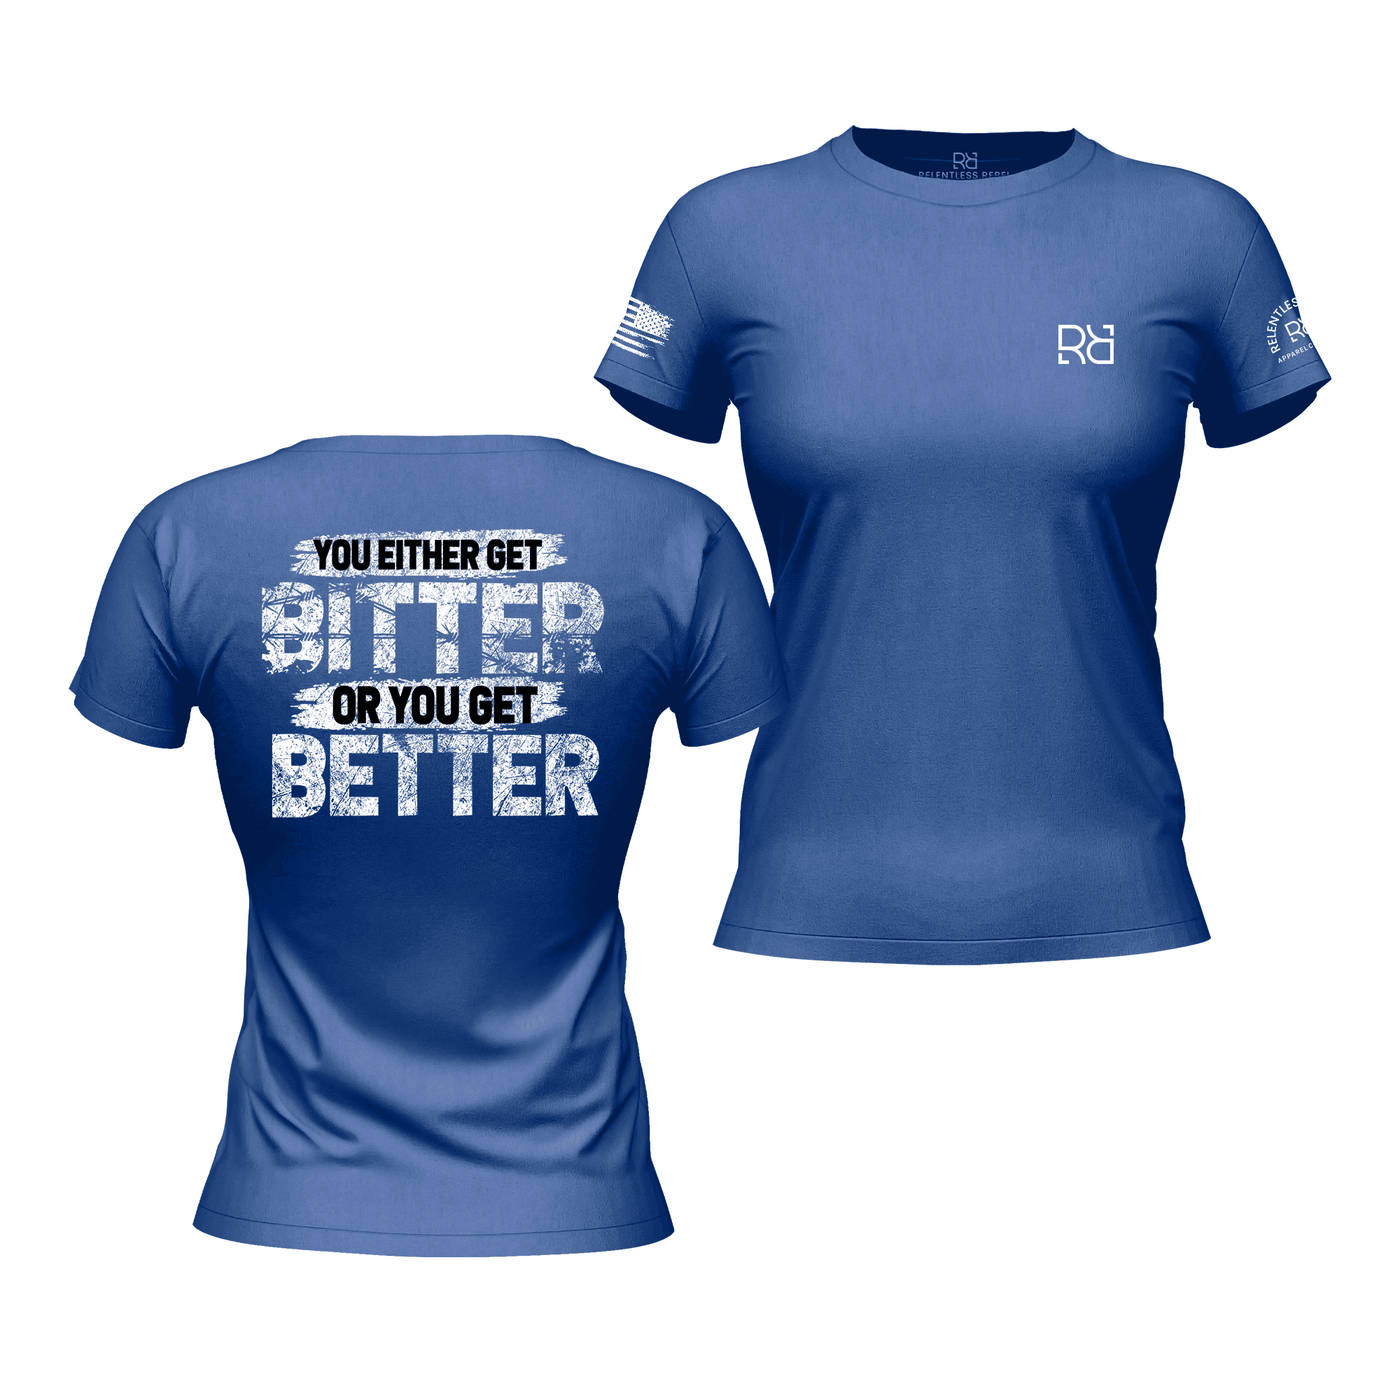 You Either Get Better Rebel Blue Women's Tee